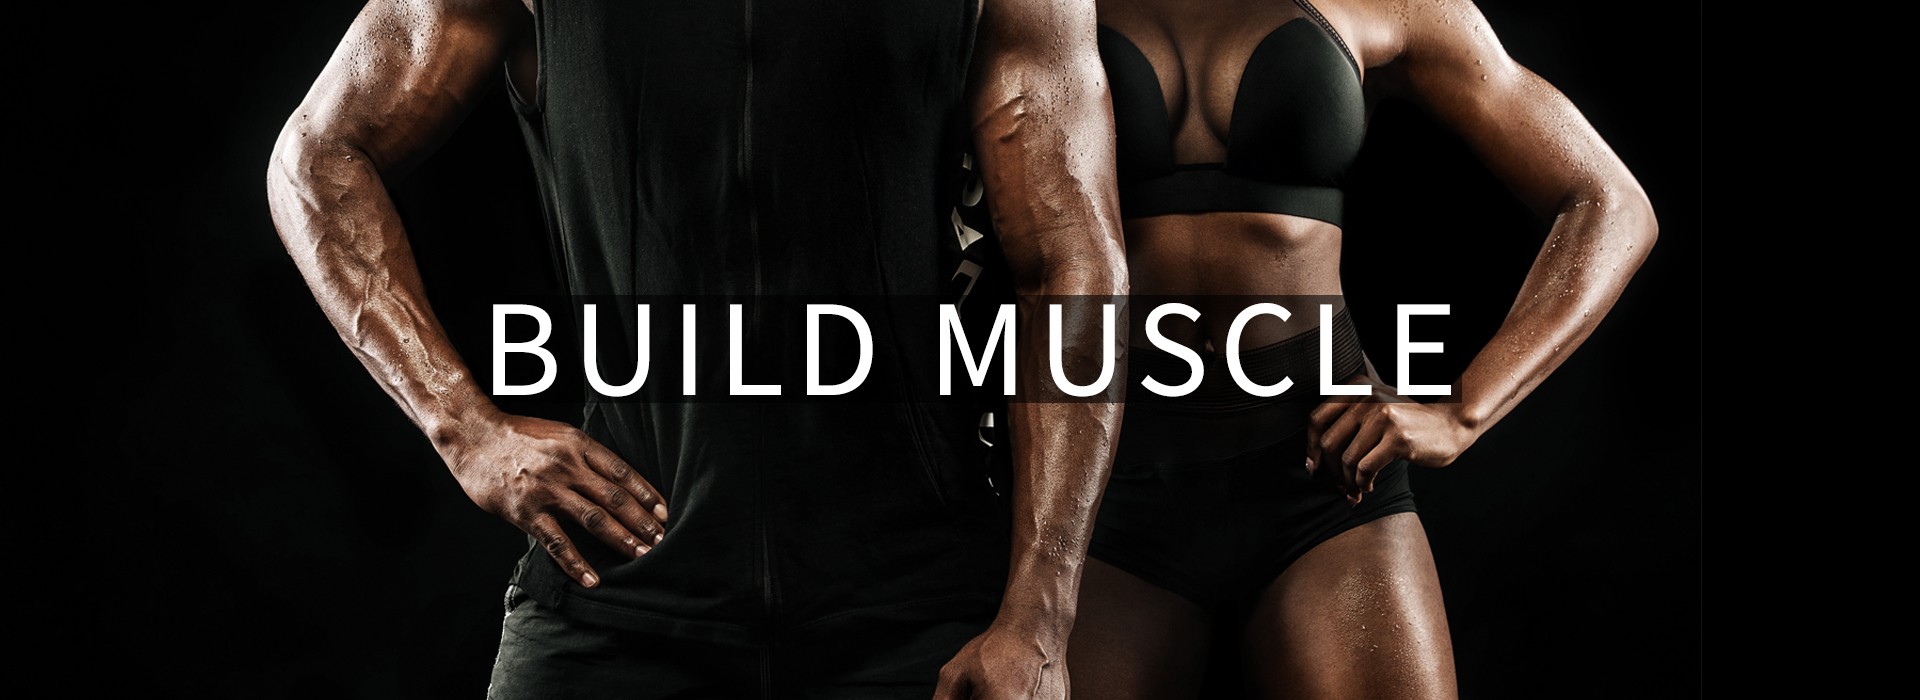 Training - Build Muscle | The Official 925 Health Website